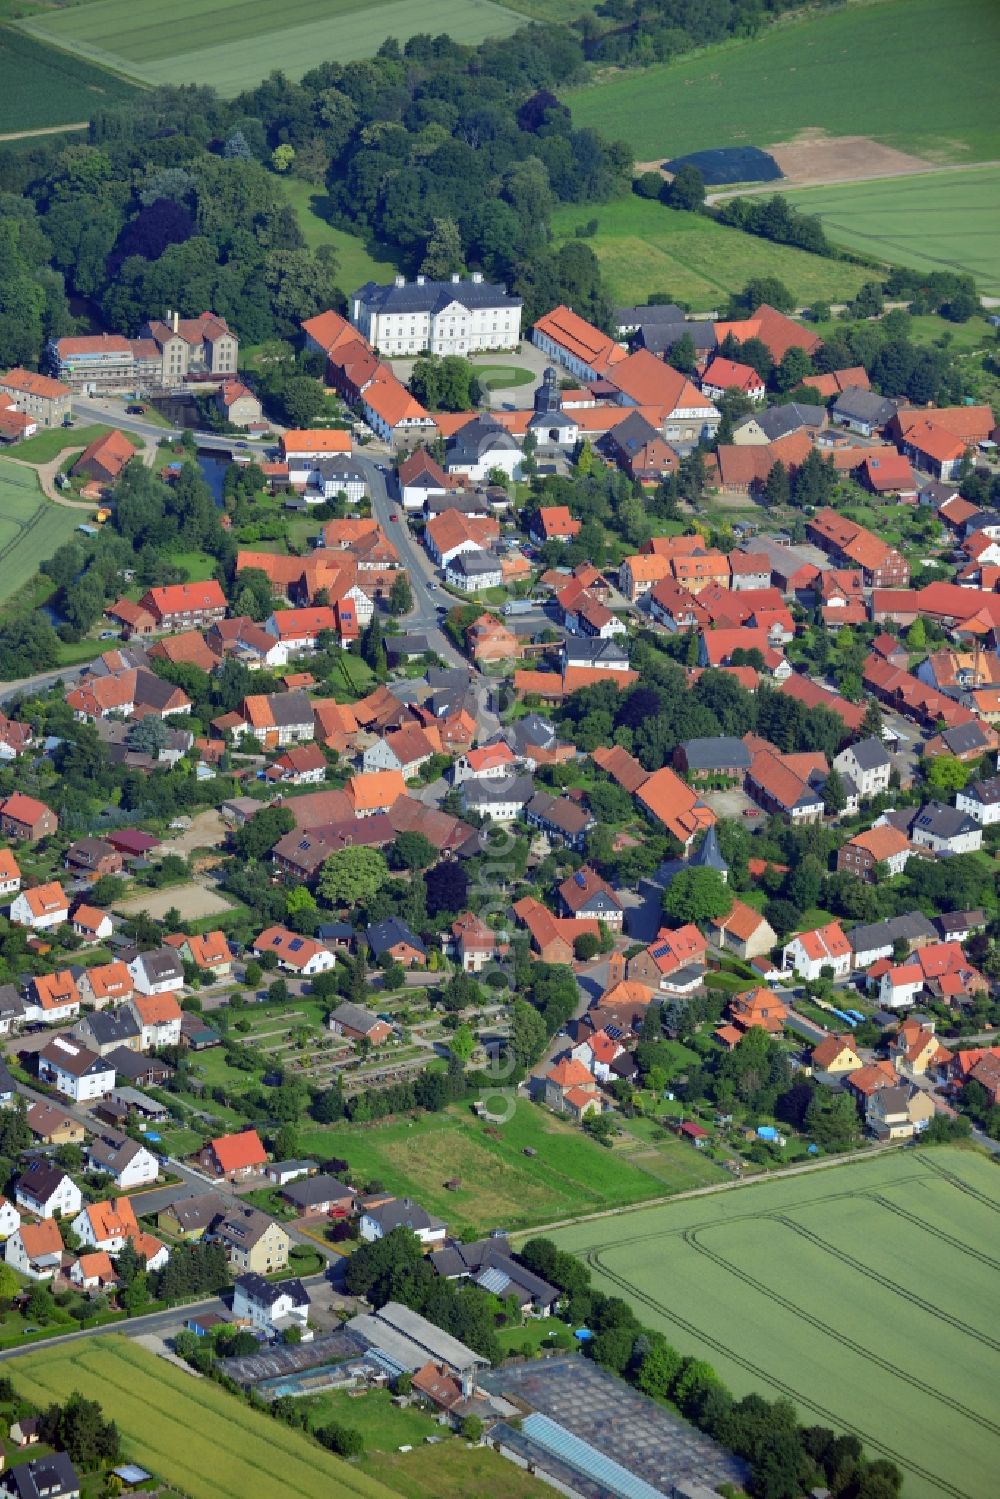 Brüggen from above - Cityscape of downtown Bruggen in Lower Saxony